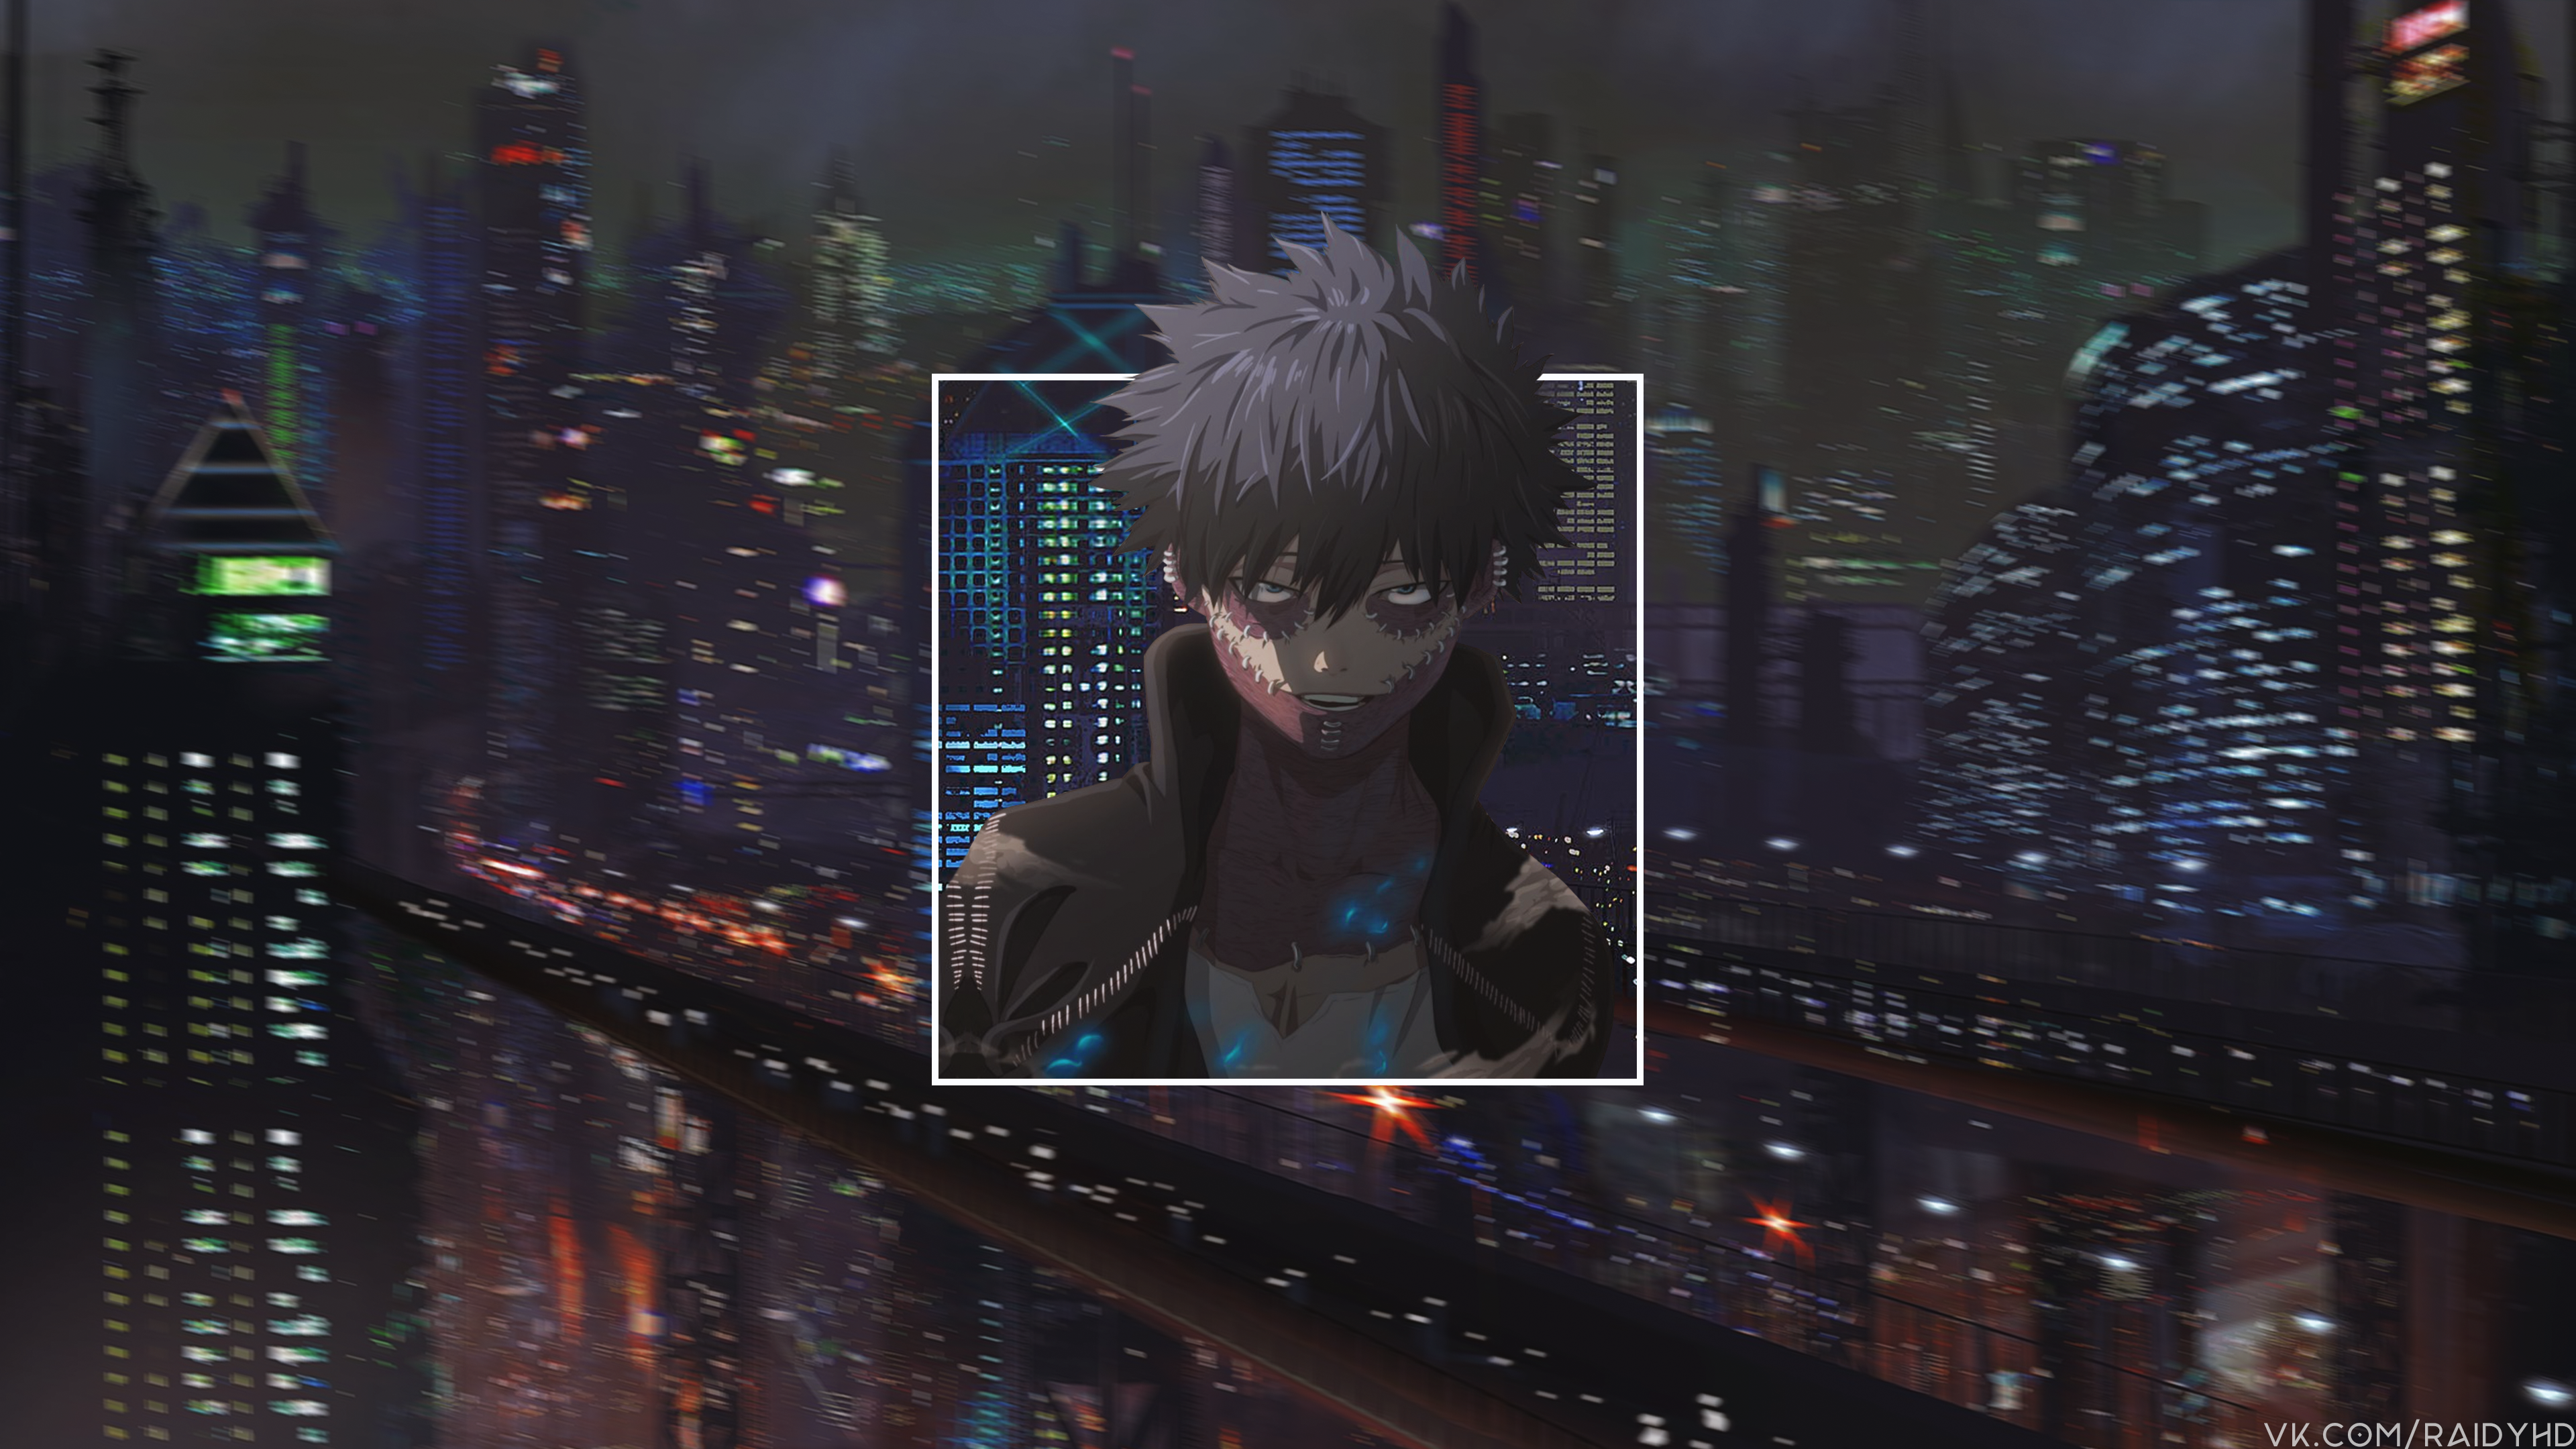 Anime 3840x2160 anime anime boys Dabi picture-in-picture